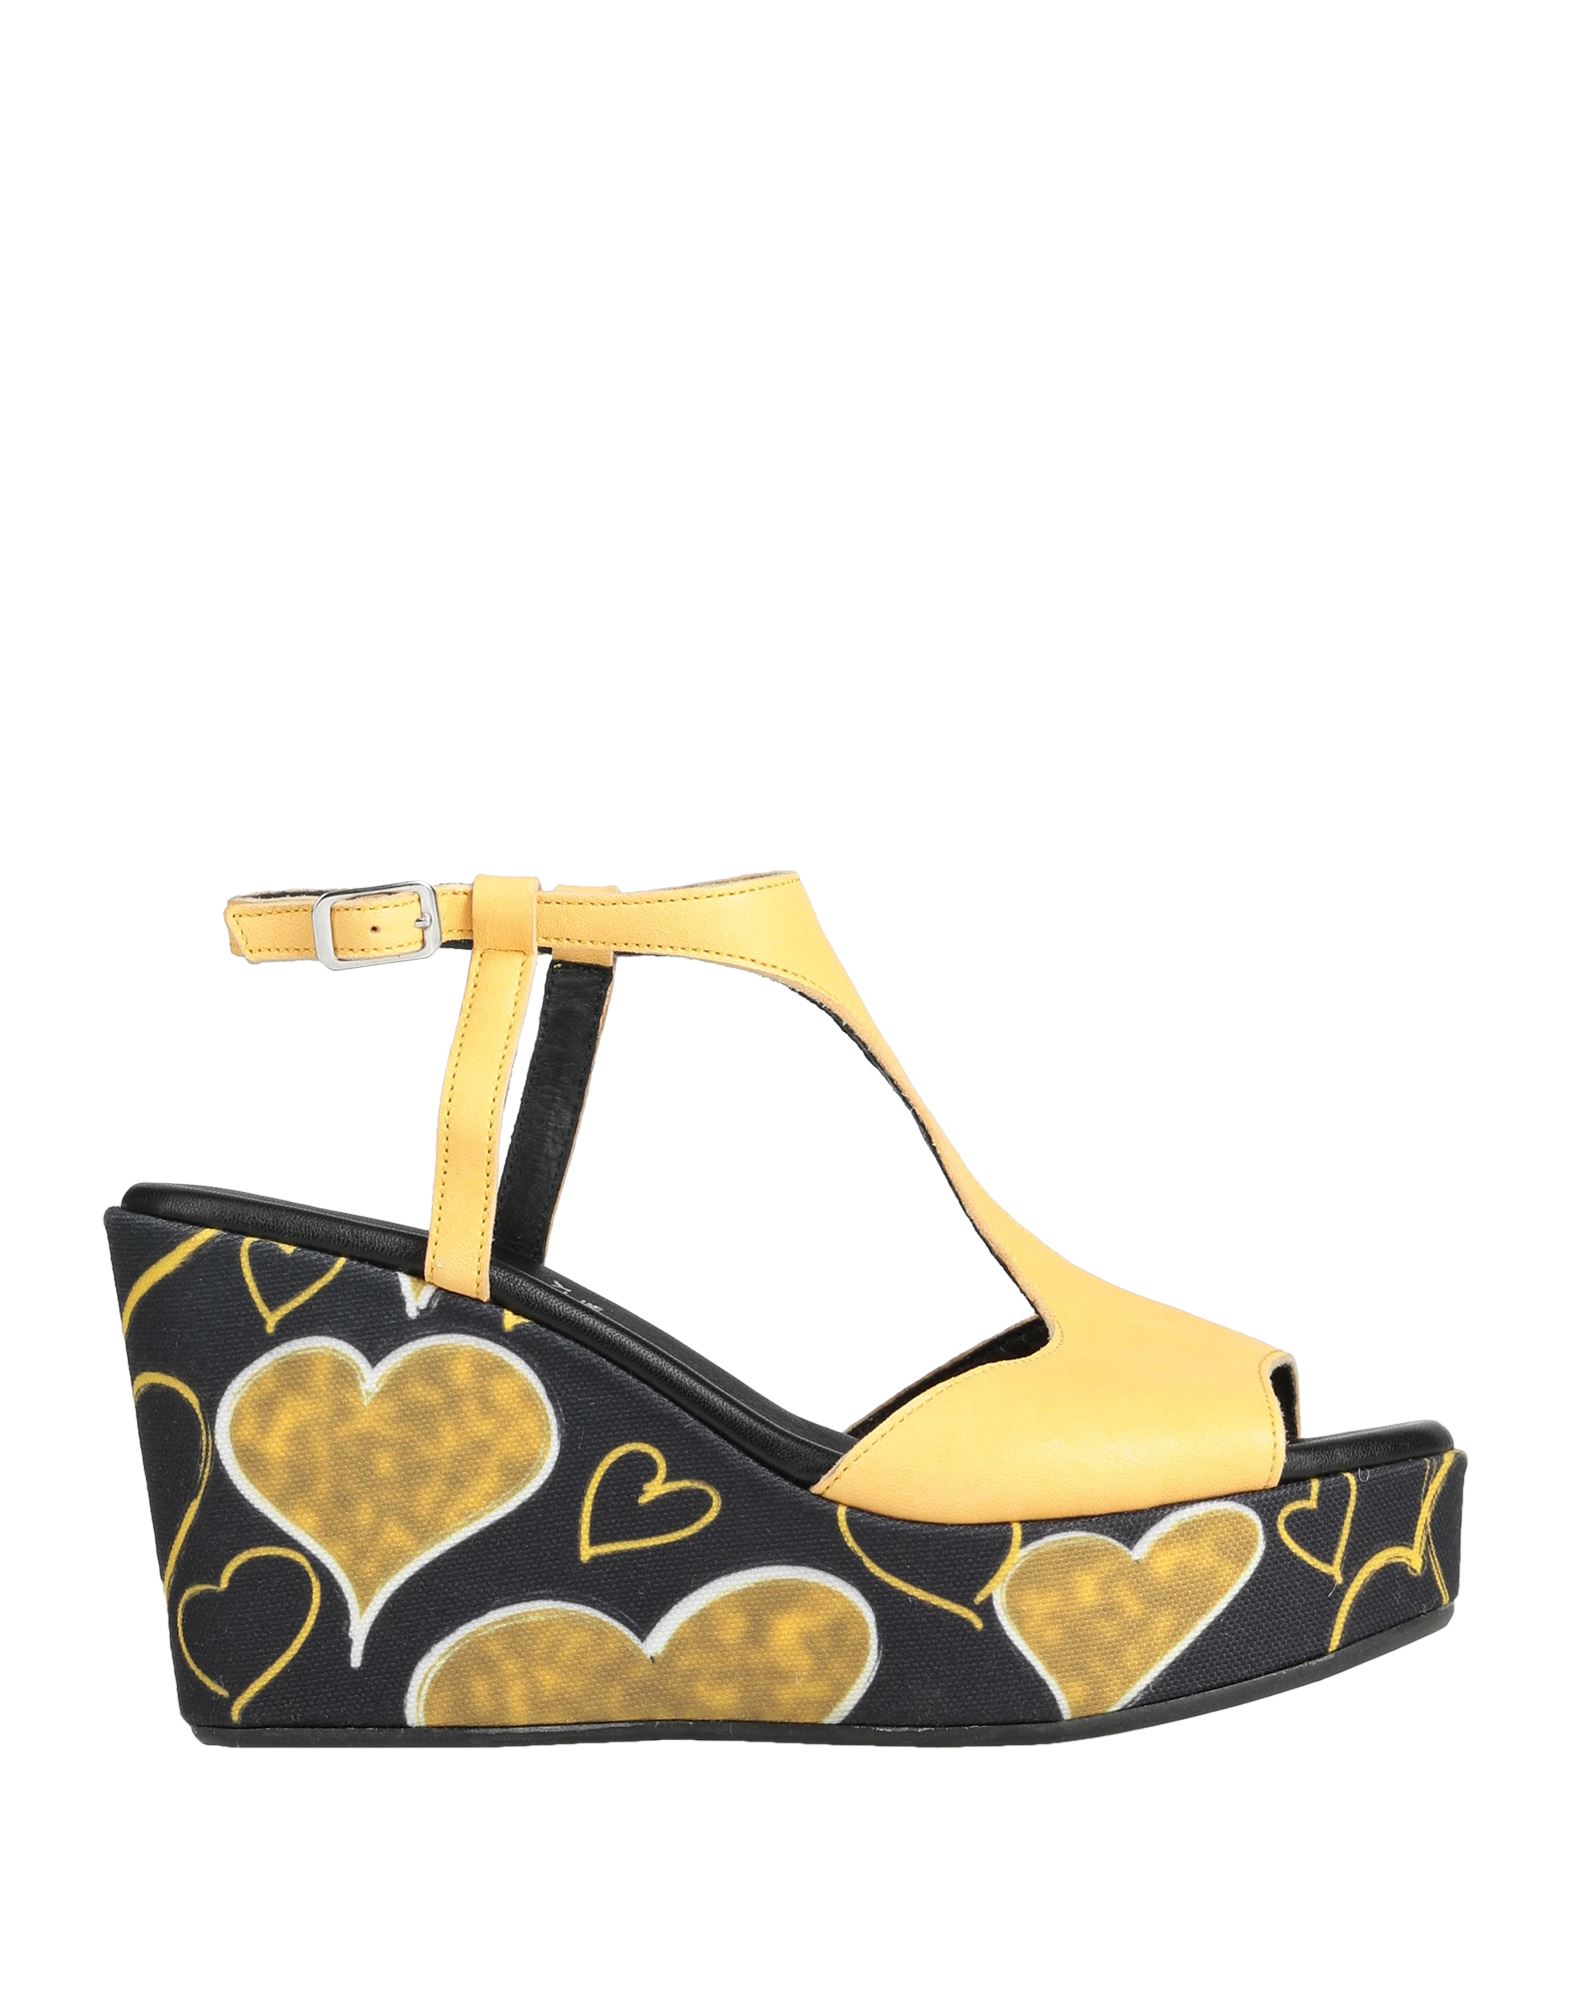 Oroscuro Sandals In Yellow